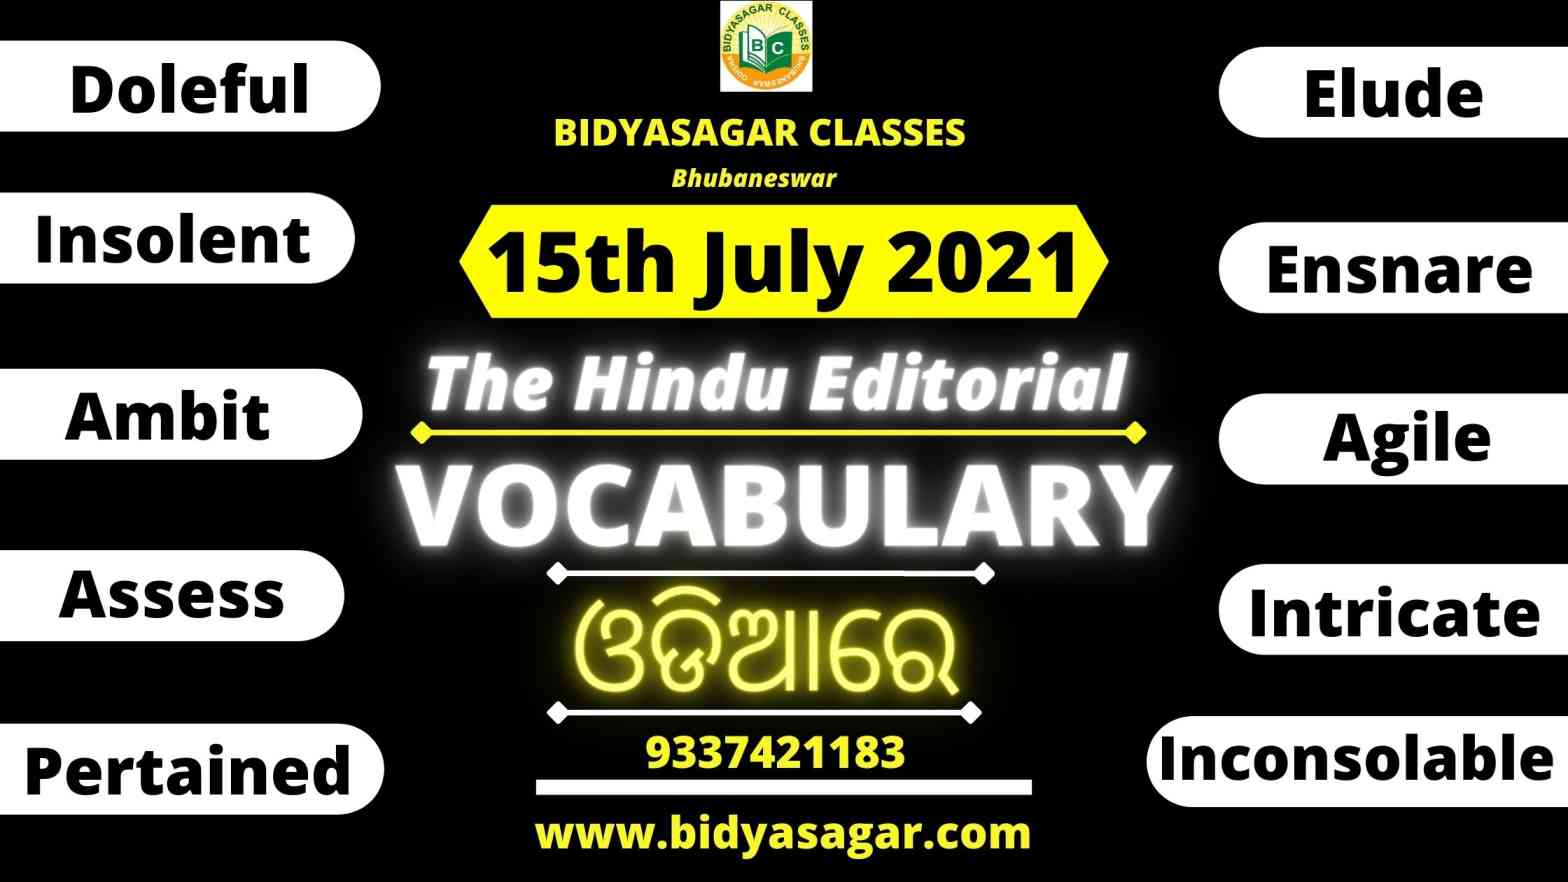 The Hindu Editorial Vocabulary of 15th July 2021